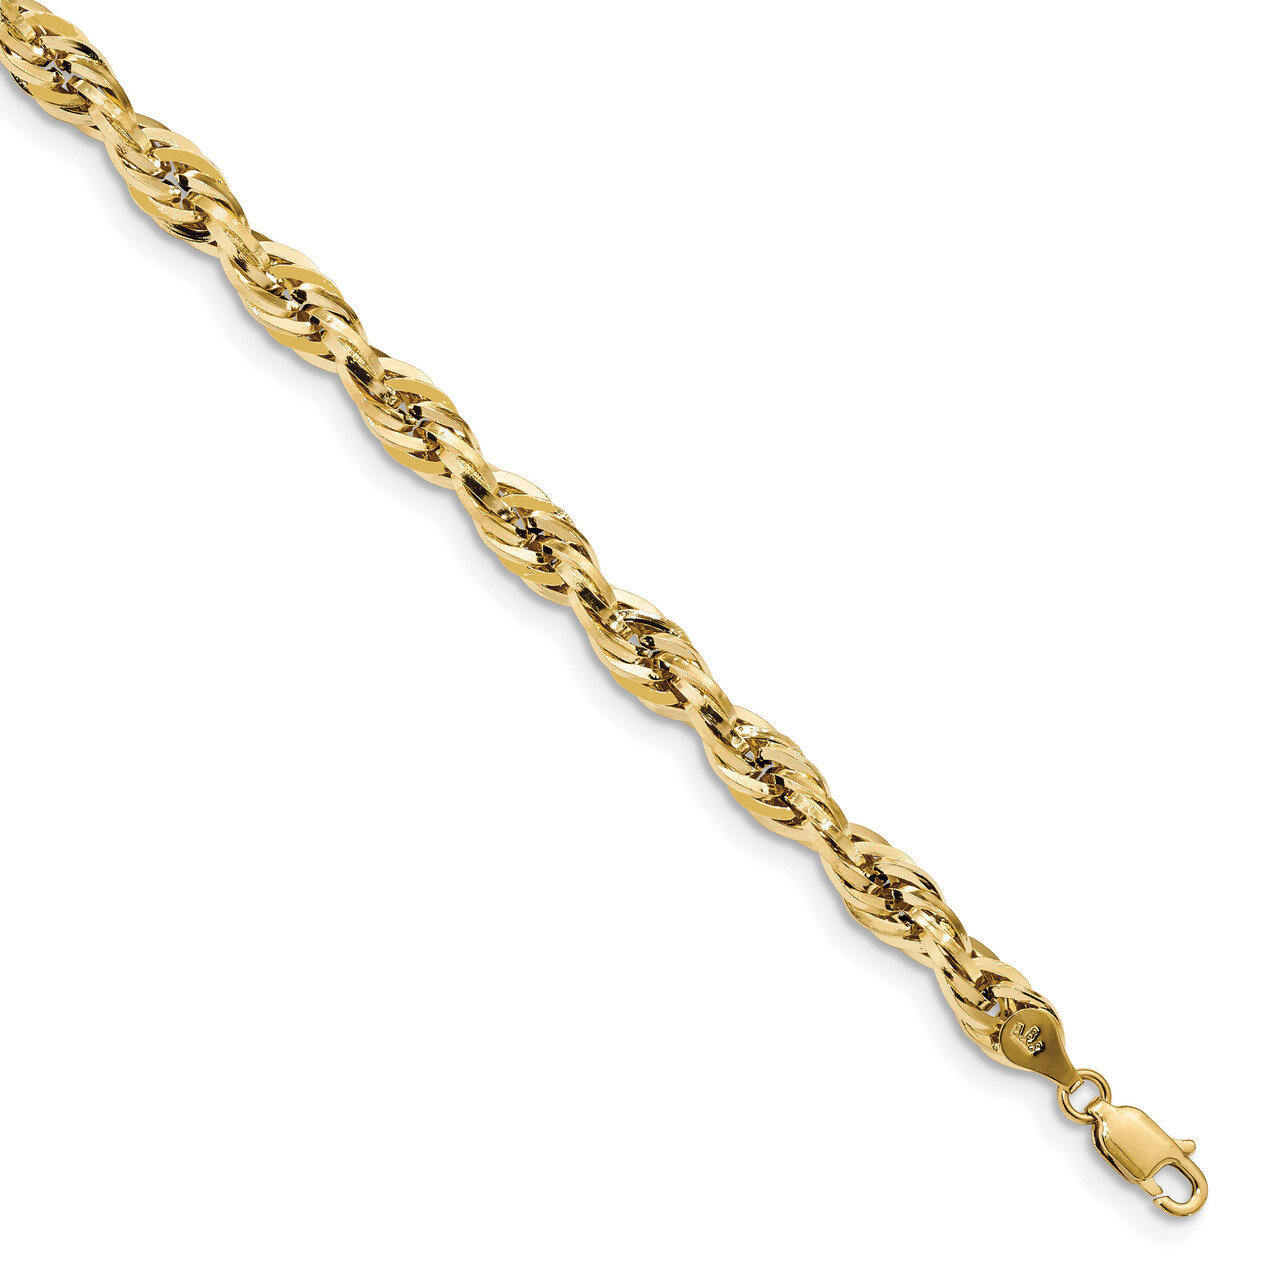 8 Inch 5.4mm Hollow Rope Chain 14k Gold BC170-8